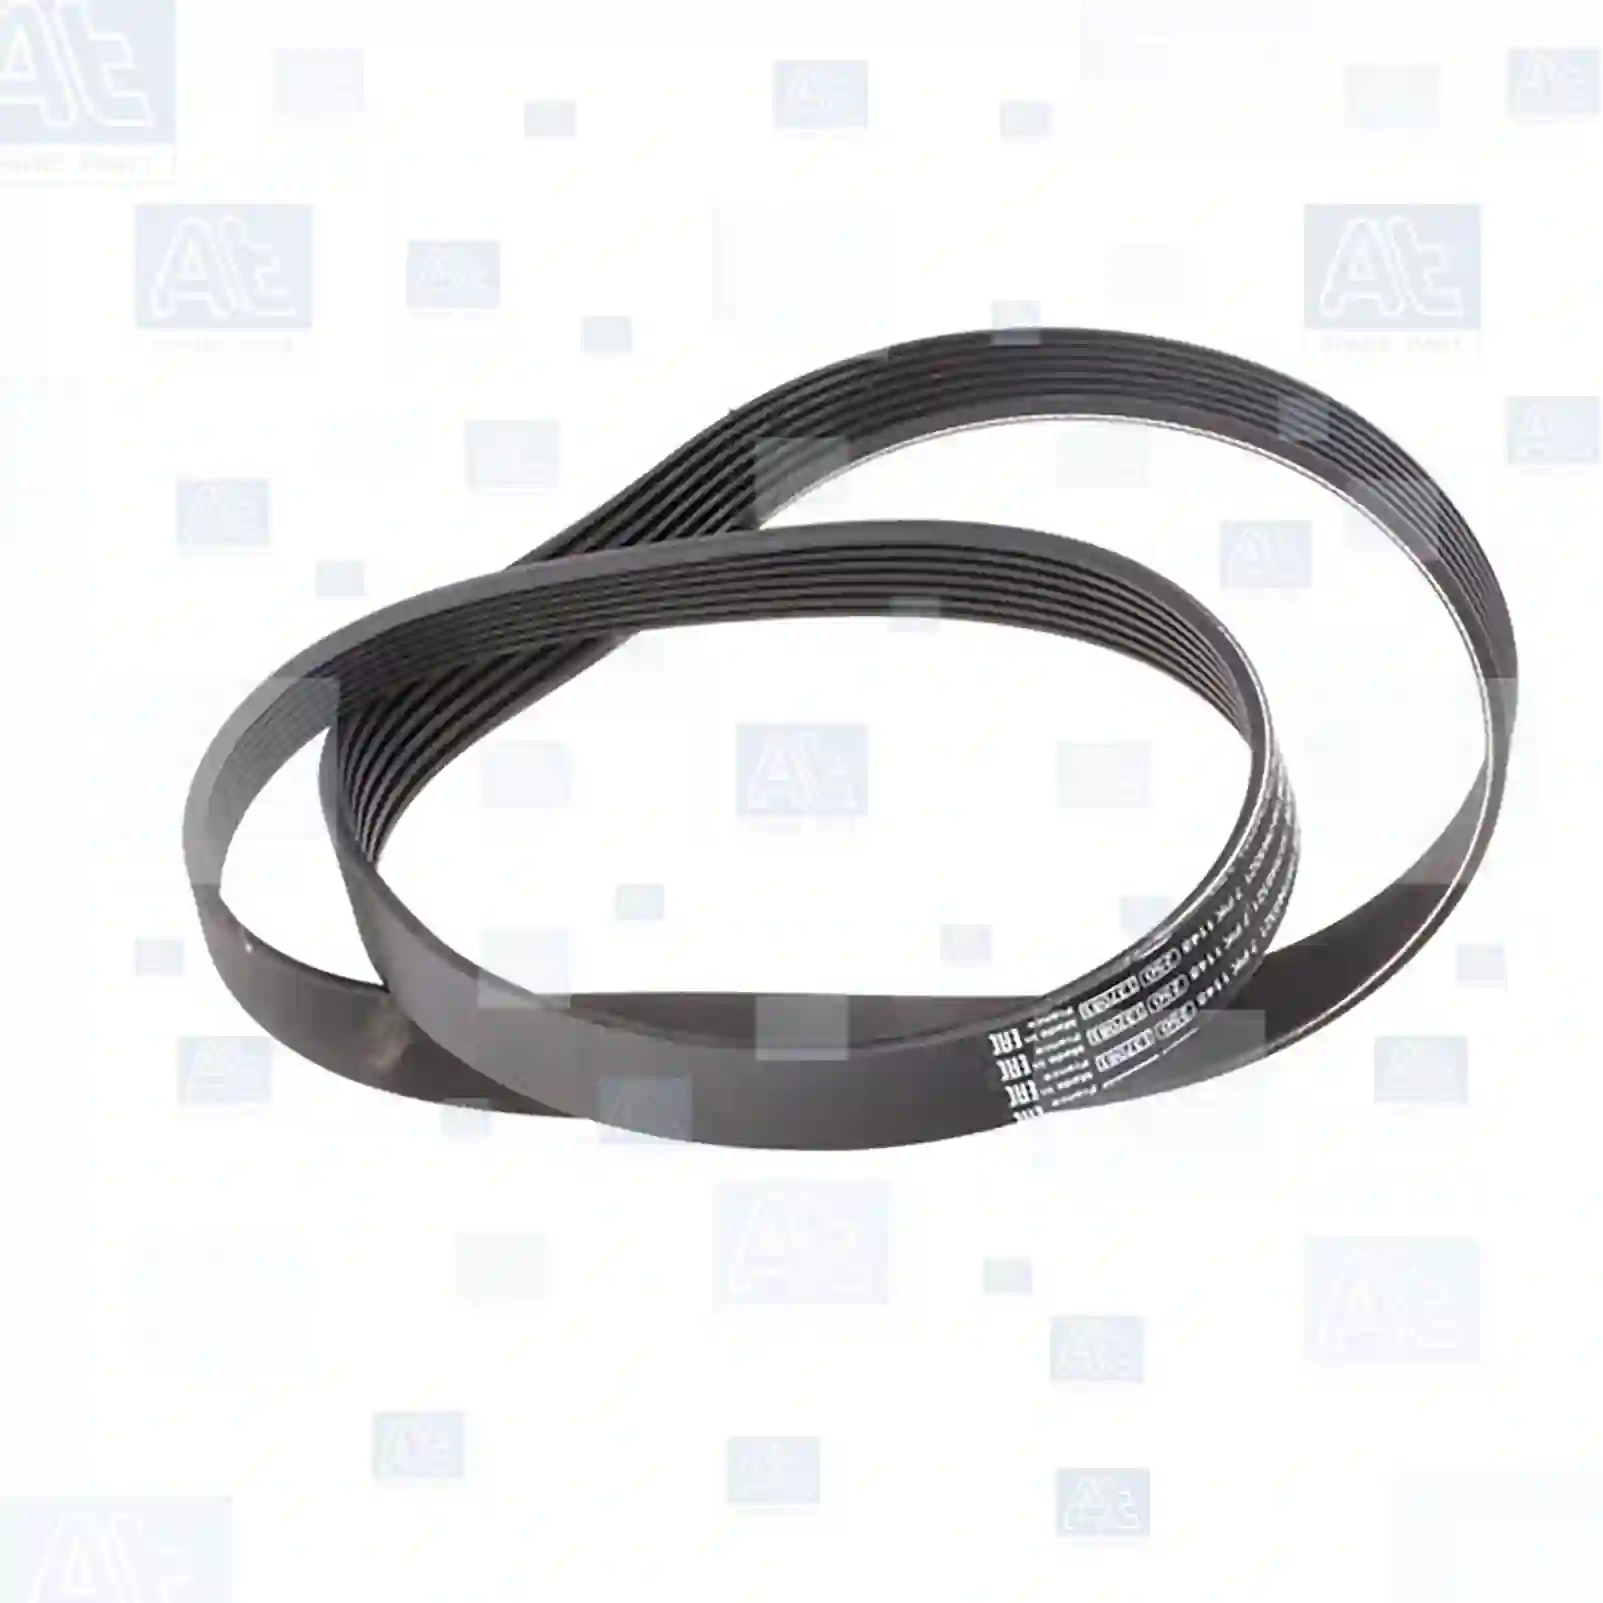 Multiribbed belt, at no 77707787, oem no: 60653029, 60676136, 71732386, 030145933AT, 030145933R, 03L903137, 03L903137G, 03L903137T, 30145933AT, WHT003848, 11281715713, 11287838200, 4792071, 4792071AB, 1611204980, 575099, 9675874480, 9805463680, 4792071, 60653029, 60676136, 71732386, 9615208280, 96152082, 07766685, 46414859, 60676136, 71732386, 9615208280, 96152082, 0039935396, MD165995, MD187463, MD317142, MD318667, 11720-0W000, 11720-0W002, 11720-VC200, 11920-BX005, 1611204980, 575099, 9675874480, 9805463680, 030145933AT, 030145933E, 030145933L, 030145933M, 030145933R, 030145933T, 03L903137, 03L903137C, 03L903137E, 03L903137G, 03L903137T, 30145933AT, 030145933AT, 030145933E, 030145933G, 030145933L, 030145933R, 030145933T, 03L903137, 03L903137T, 30145933AT, 030145933AT, 030145933E, 030145933G, 030145933L, 030145933M, 030145933T, 030145966L, 03L903137E, 03L903137T, 044903137AE, 045145933L, 30145933AT, 44903137AE At Spare Part | Engine, Accelerator Pedal, Camshaft, Connecting Rod, Crankcase, Crankshaft, Cylinder Head, Engine Suspension Mountings, Exhaust Manifold, Exhaust Gas Recirculation, Filter Kits, Flywheel Housing, General Overhaul Kits, Engine, Intake Manifold, Oil Cleaner, Oil Cooler, Oil Filter, Oil Pump, Oil Sump, Piston & Liner, Sensor & Switch, Timing Case, Turbocharger, Cooling System, Belt Tensioner, Coolant Filter, Coolant Pipe, Corrosion Prevention Agent, Drive, Expansion Tank, Fan, Intercooler, Monitors & Gauges, Radiator, Thermostat, V-Belt / Timing belt, Water Pump, Fuel System, Electronical Injector Unit, Feed Pump, Fuel Filter, cpl., Fuel Gauge Sender,  Fuel Line, Fuel Pump, Fuel Tank, Injection Line Kit, Injection Pump, Exhaust System, Clutch & Pedal, Gearbox, Propeller Shaft, Axles, Brake System, Hubs & Wheels, Suspension, Leaf Spring, Universal Parts / Accessories, Steering, Electrical System, Cabin Multiribbed belt, at no 77707787, oem no: 60653029, 60676136, 71732386, 030145933AT, 030145933R, 03L903137, 03L903137G, 03L903137T, 30145933AT, WHT003848, 11281715713, 11287838200, 4792071, 4792071AB, 1611204980, 575099, 9675874480, 9805463680, 4792071, 60653029, 60676136, 71732386, 9615208280, 96152082, 07766685, 46414859, 60676136, 71732386, 9615208280, 96152082, 0039935396, MD165995, MD187463, MD317142, MD318667, 11720-0W000, 11720-0W002, 11720-VC200, 11920-BX005, 1611204980, 575099, 9675874480, 9805463680, 030145933AT, 030145933E, 030145933L, 030145933M, 030145933R, 030145933T, 03L903137, 03L903137C, 03L903137E, 03L903137G, 03L903137T, 30145933AT, 030145933AT, 030145933E, 030145933G, 030145933L, 030145933R, 030145933T, 03L903137, 03L903137T, 30145933AT, 030145933AT, 030145933E, 030145933G, 030145933L, 030145933M, 030145933T, 030145966L, 03L903137E, 03L903137T, 044903137AE, 045145933L, 30145933AT, 44903137AE At Spare Part | Engine, Accelerator Pedal, Camshaft, Connecting Rod, Crankcase, Crankshaft, Cylinder Head, Engine Suspension Mountings, Exhaust Manifold, Exhaust Gas Recirculation, Filter Kits, Flywheel Housing, General Overhaul Kits, Engine, Intake Manifold, Oil Cleaner, Oil Cooler, Oil Filter, Oil Pump, Oil Sump, Piston & Liner, Sensor & Switch, Timing Case, Turbocharger, Cooling System, Belt Tensioner, Coolant Filter, Coolant Pipe, Corrosion Prevention Agent, Drive, Expansion Tank, Fan, Intercooler, Monitors & Gauges, Radiator, Thermostat, V-Belt / Timing belt, Water Pump, Fuel System, Electronical Injector Unit, Feed Pump, Fuel Filter, cpl., Fuel Gauge Sender,  Fuel Line, Fuel Pump, Fuel Tank, Injection Line Kit, Injection Pump, Exhaust System, Clutch & Pedal, Gearbox, Propeller Shaft, Axles, Brake System, Hubs & Wheels, Suspension, Leaf Spring, Universal Parts / Accessories, Steering, Electrical System, Cabin